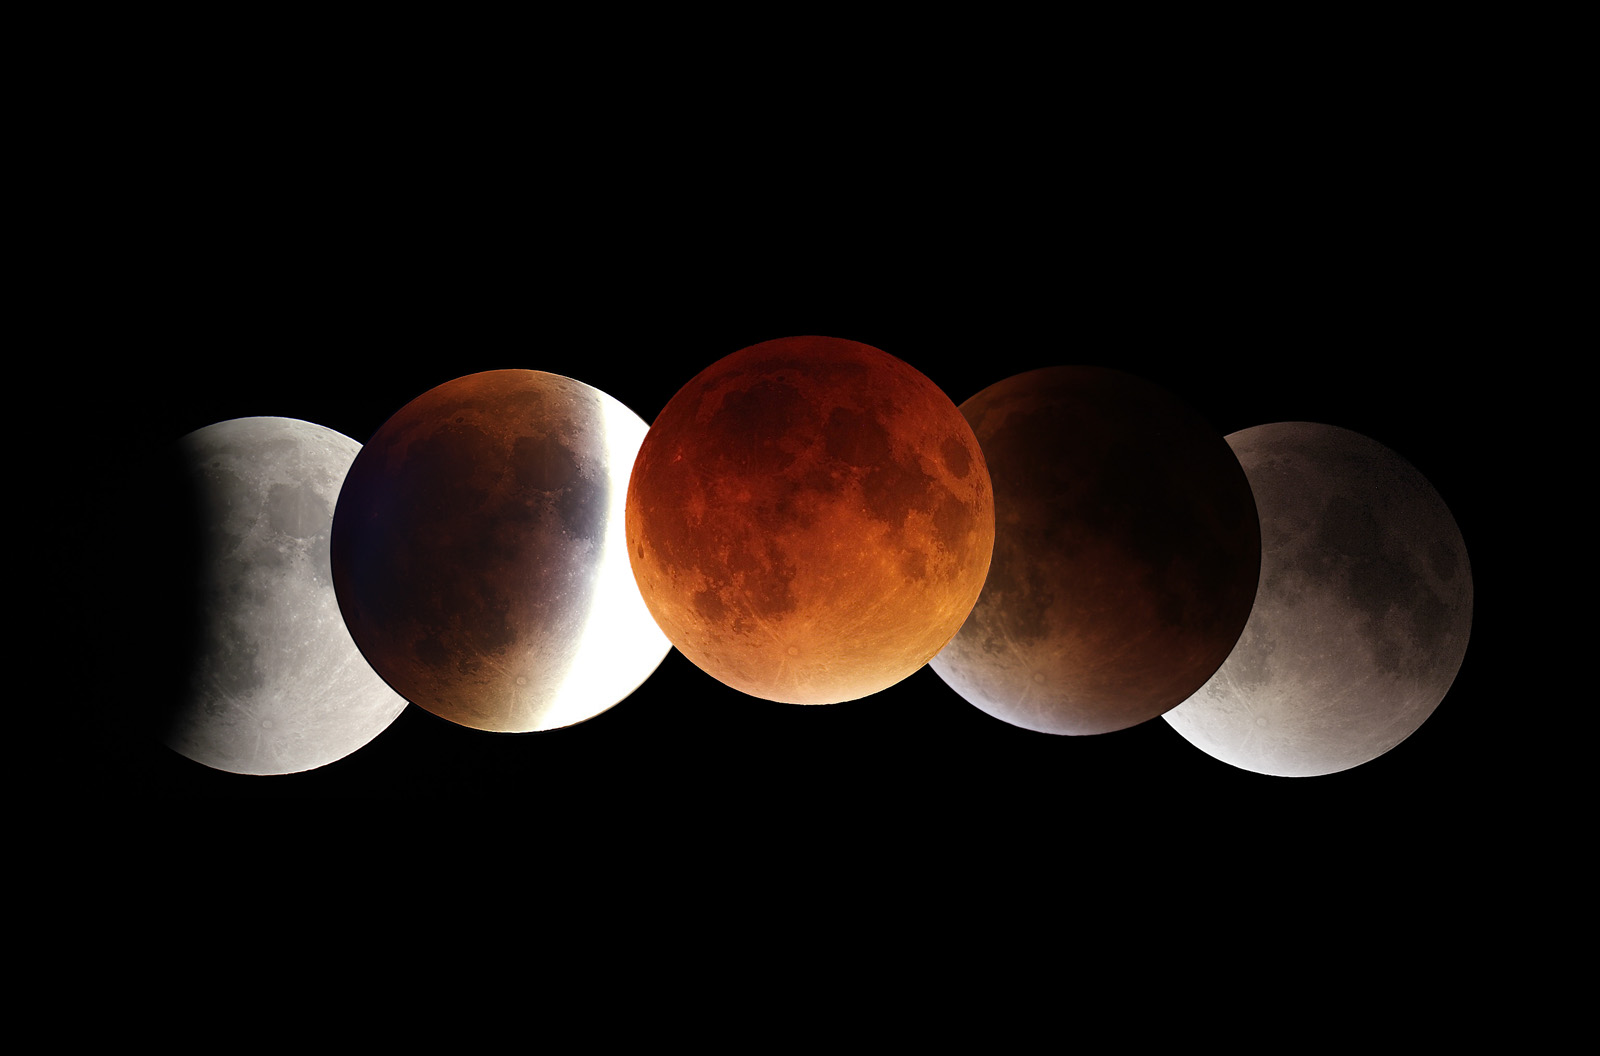 Eclipse Phases